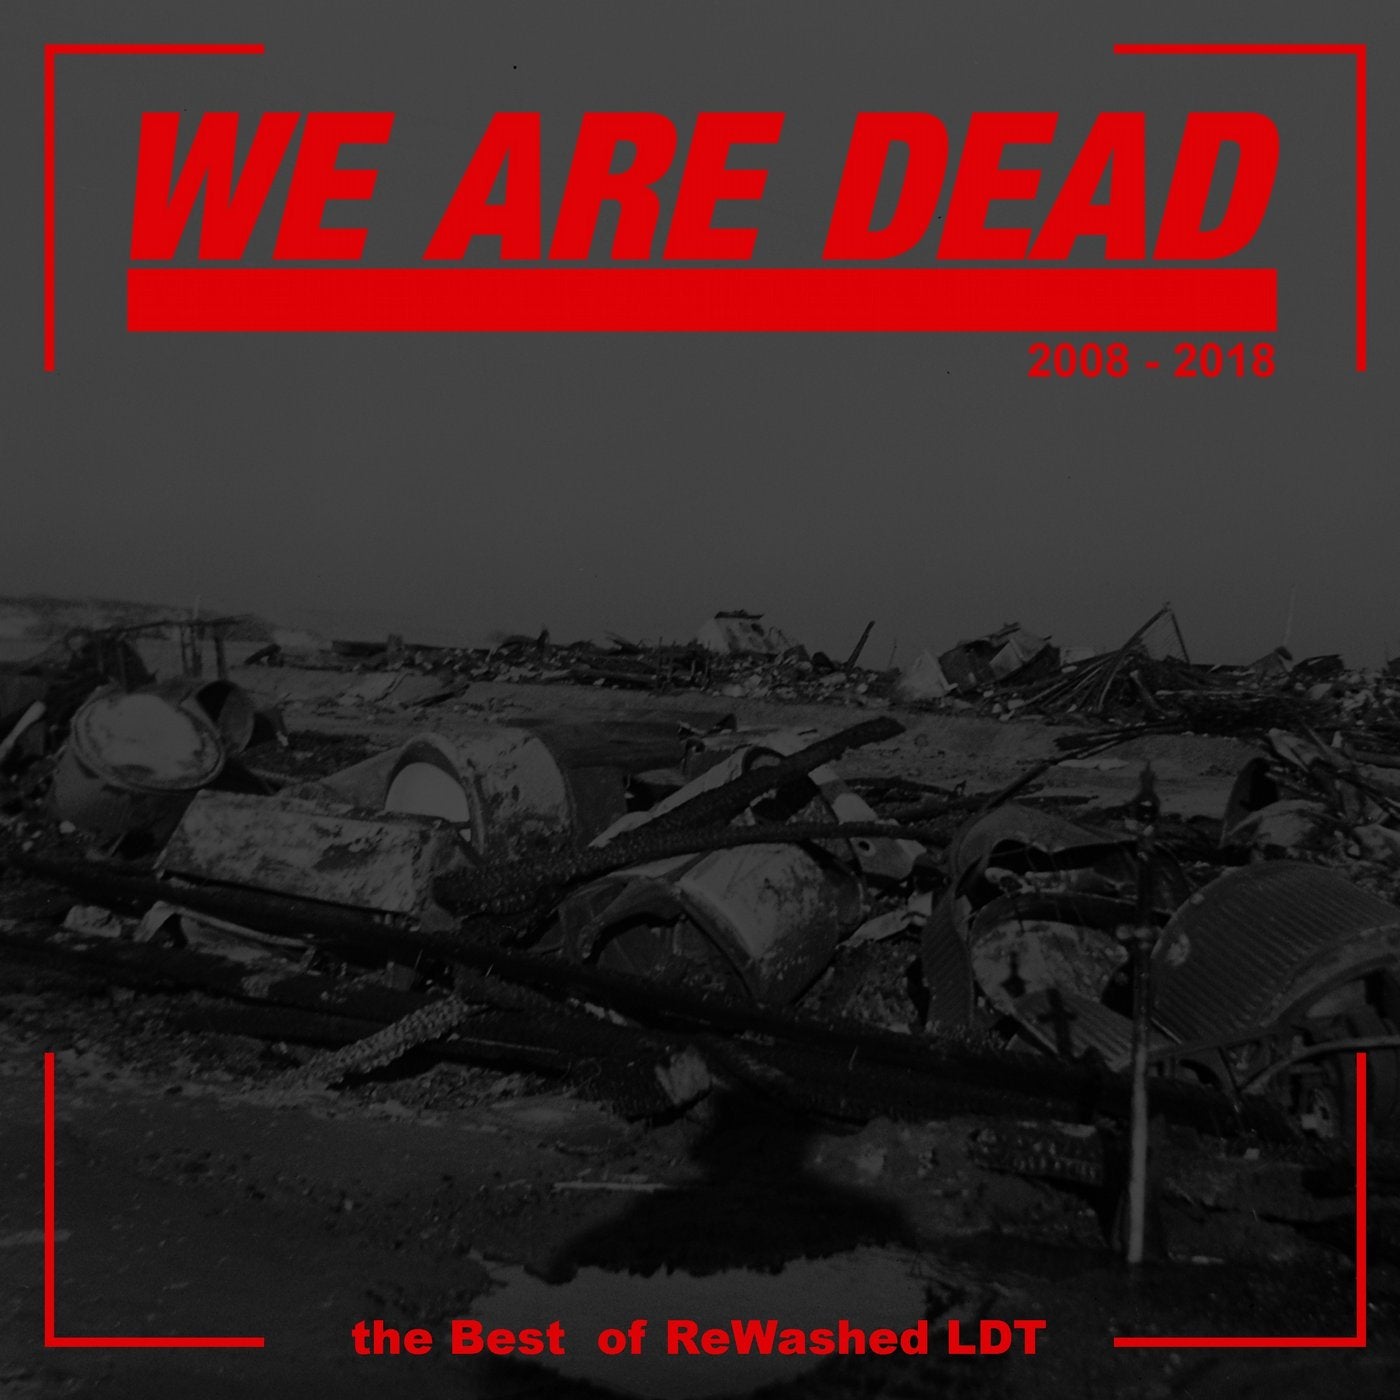 We Are Dead: The Best of Rewashed LDT